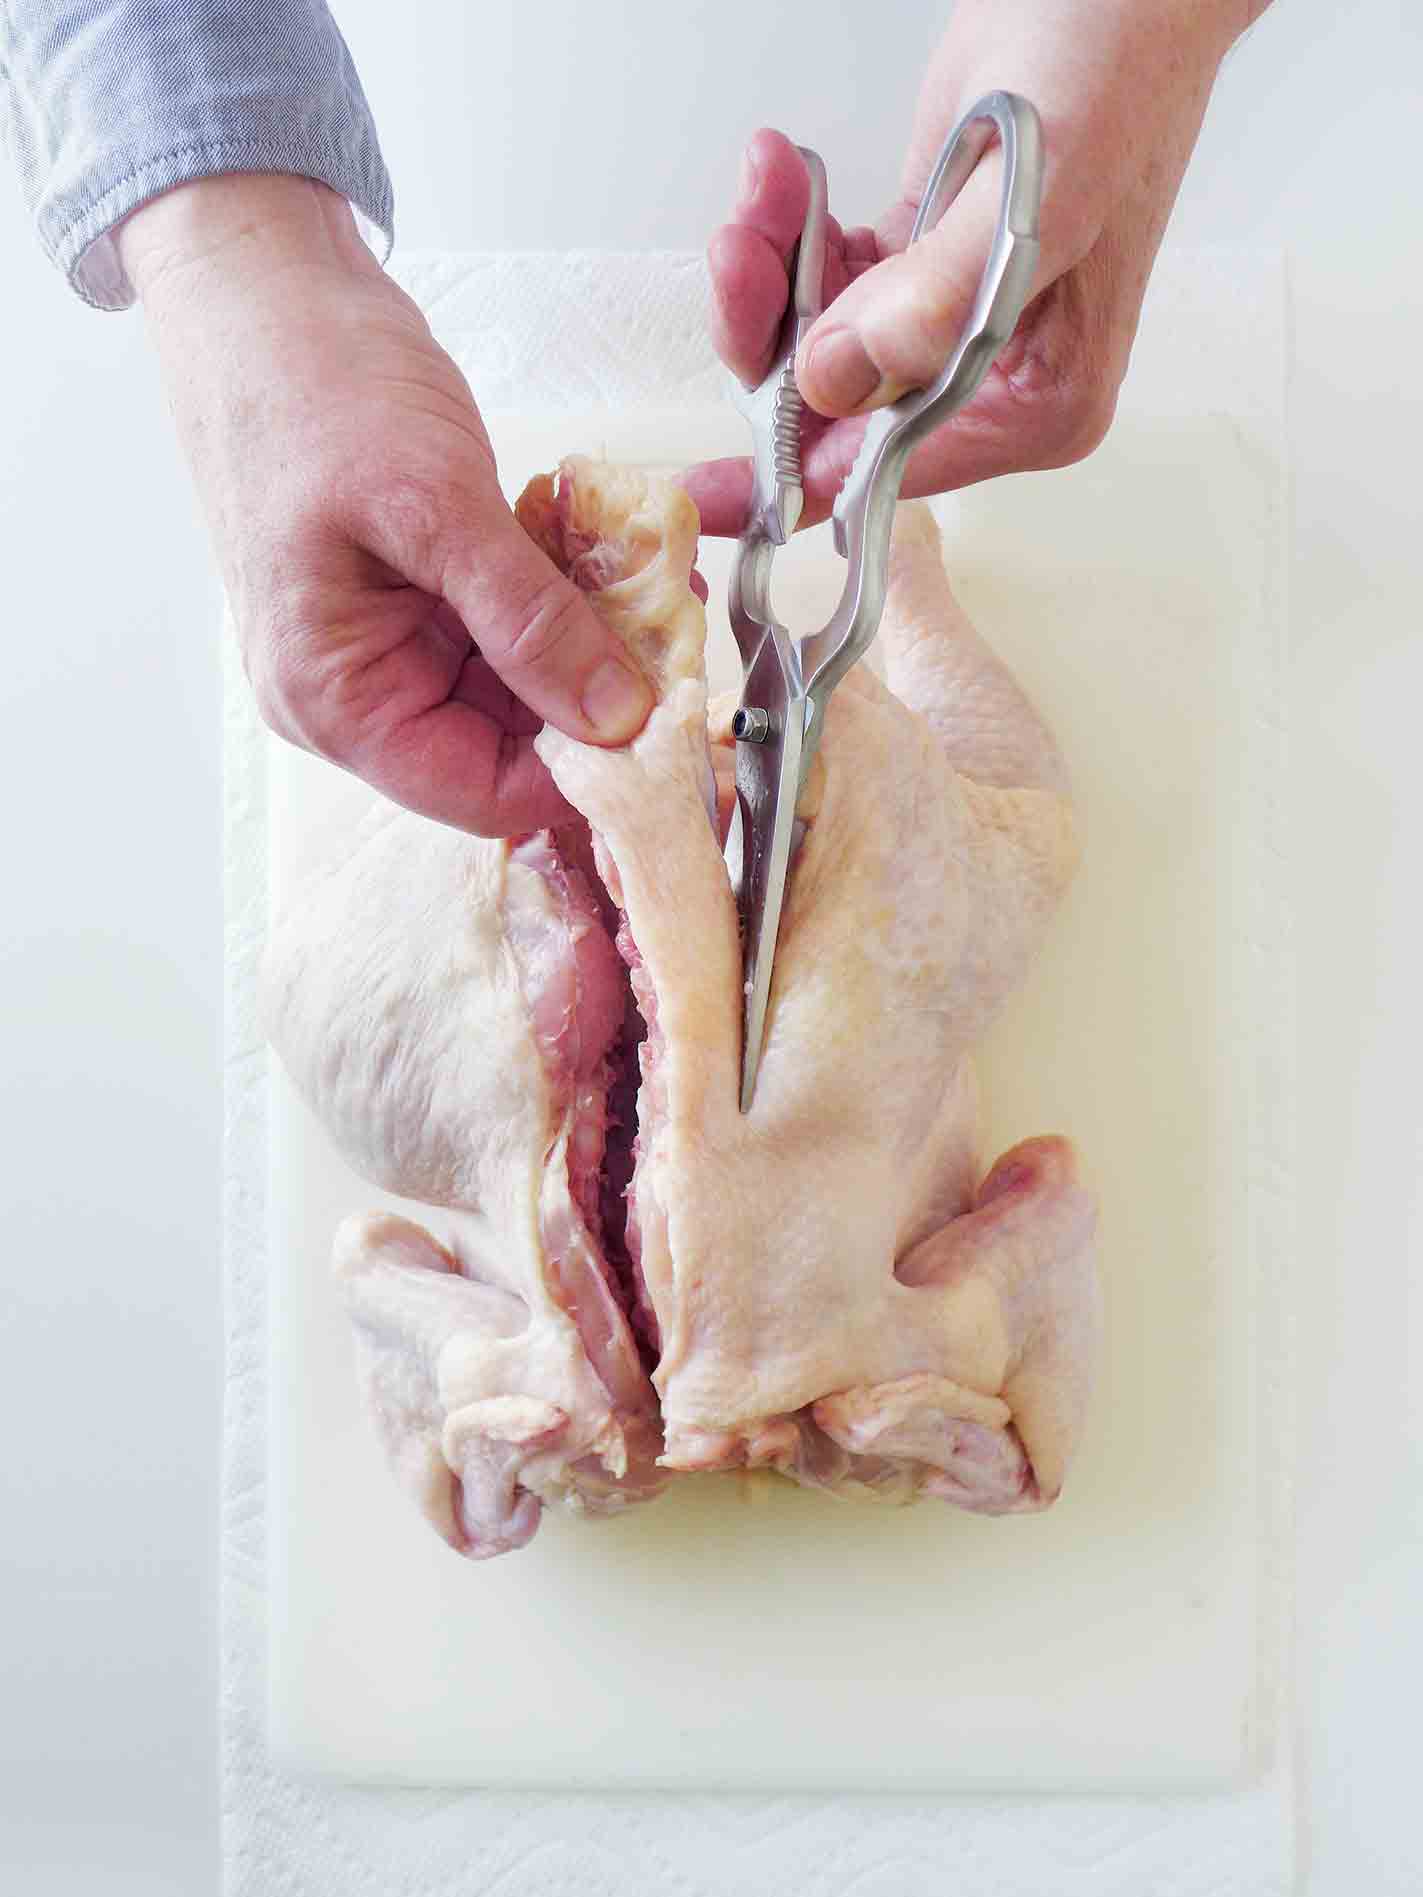 A person cutting through the backbone of a chicken to spatchcock it.